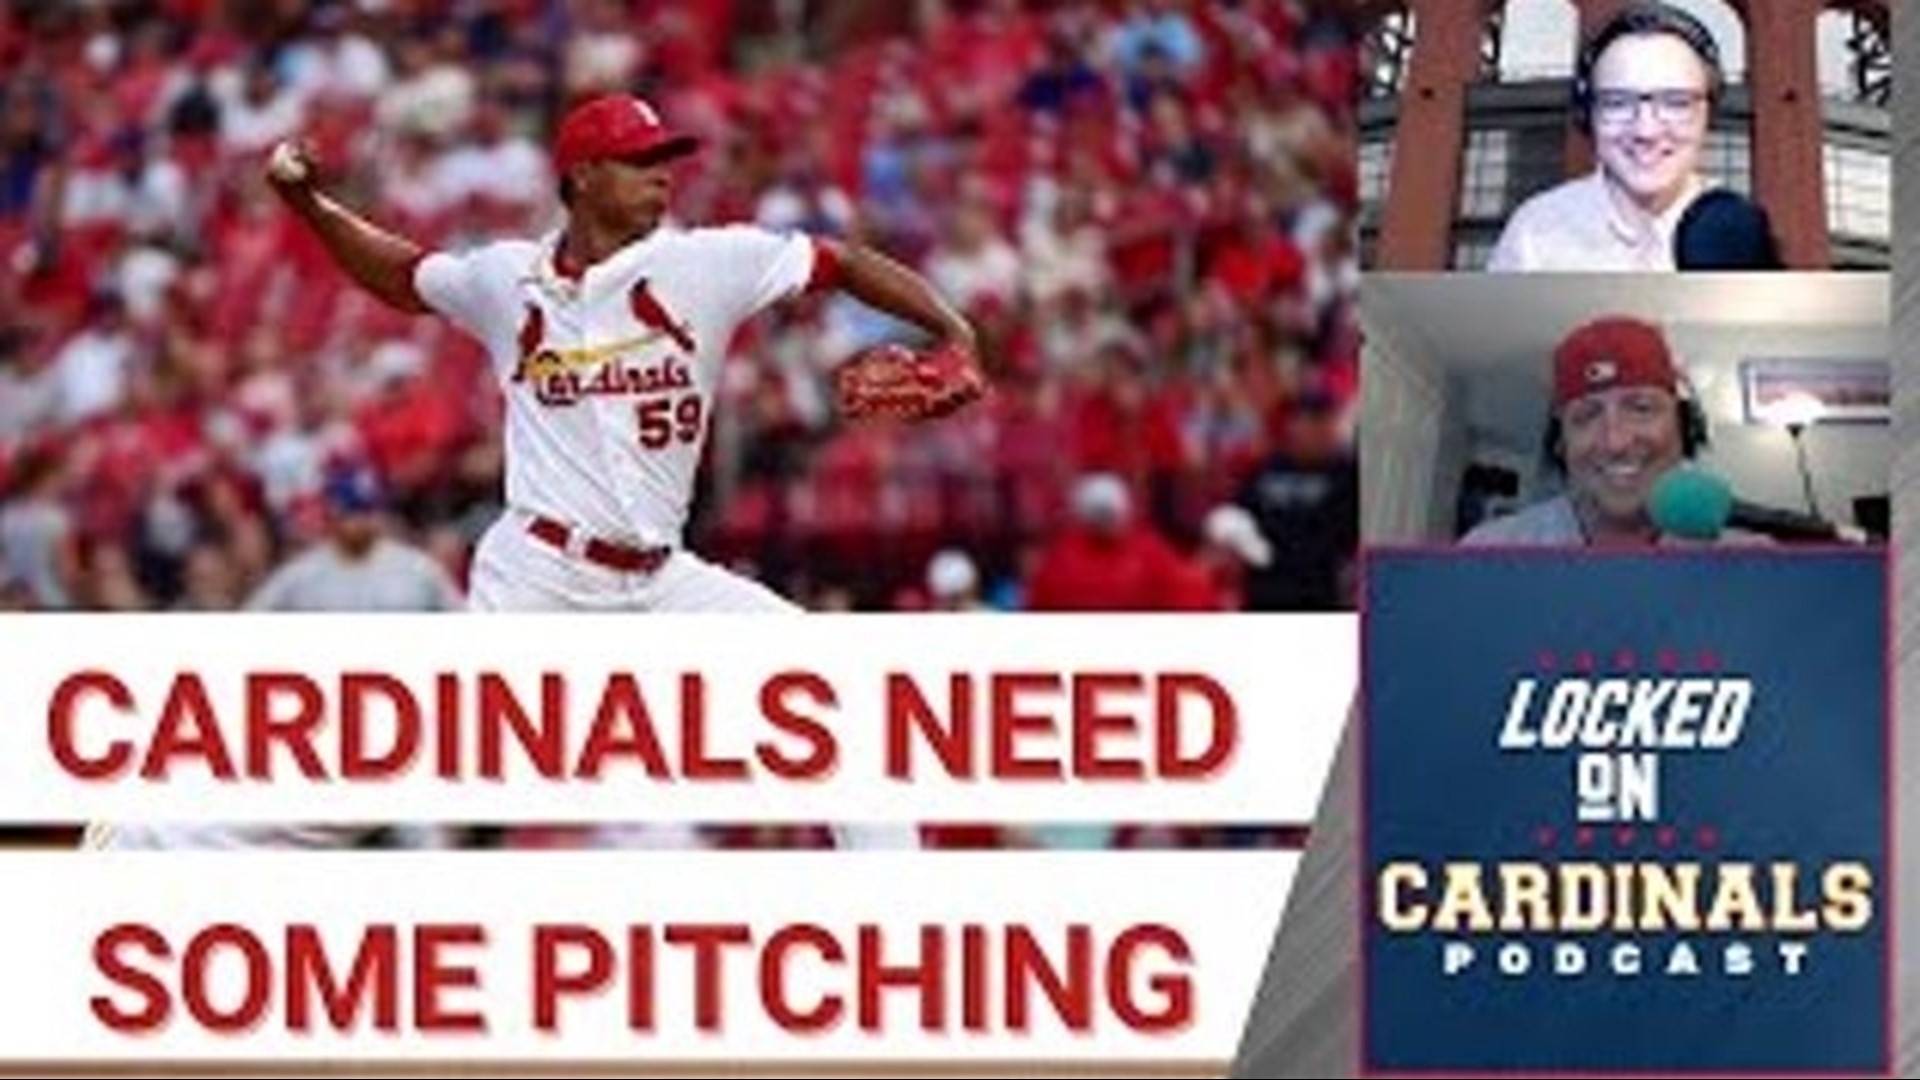 The St. Louis Cardinals, as it stands, are a playoff team. However, that does not mean they are without weakness.